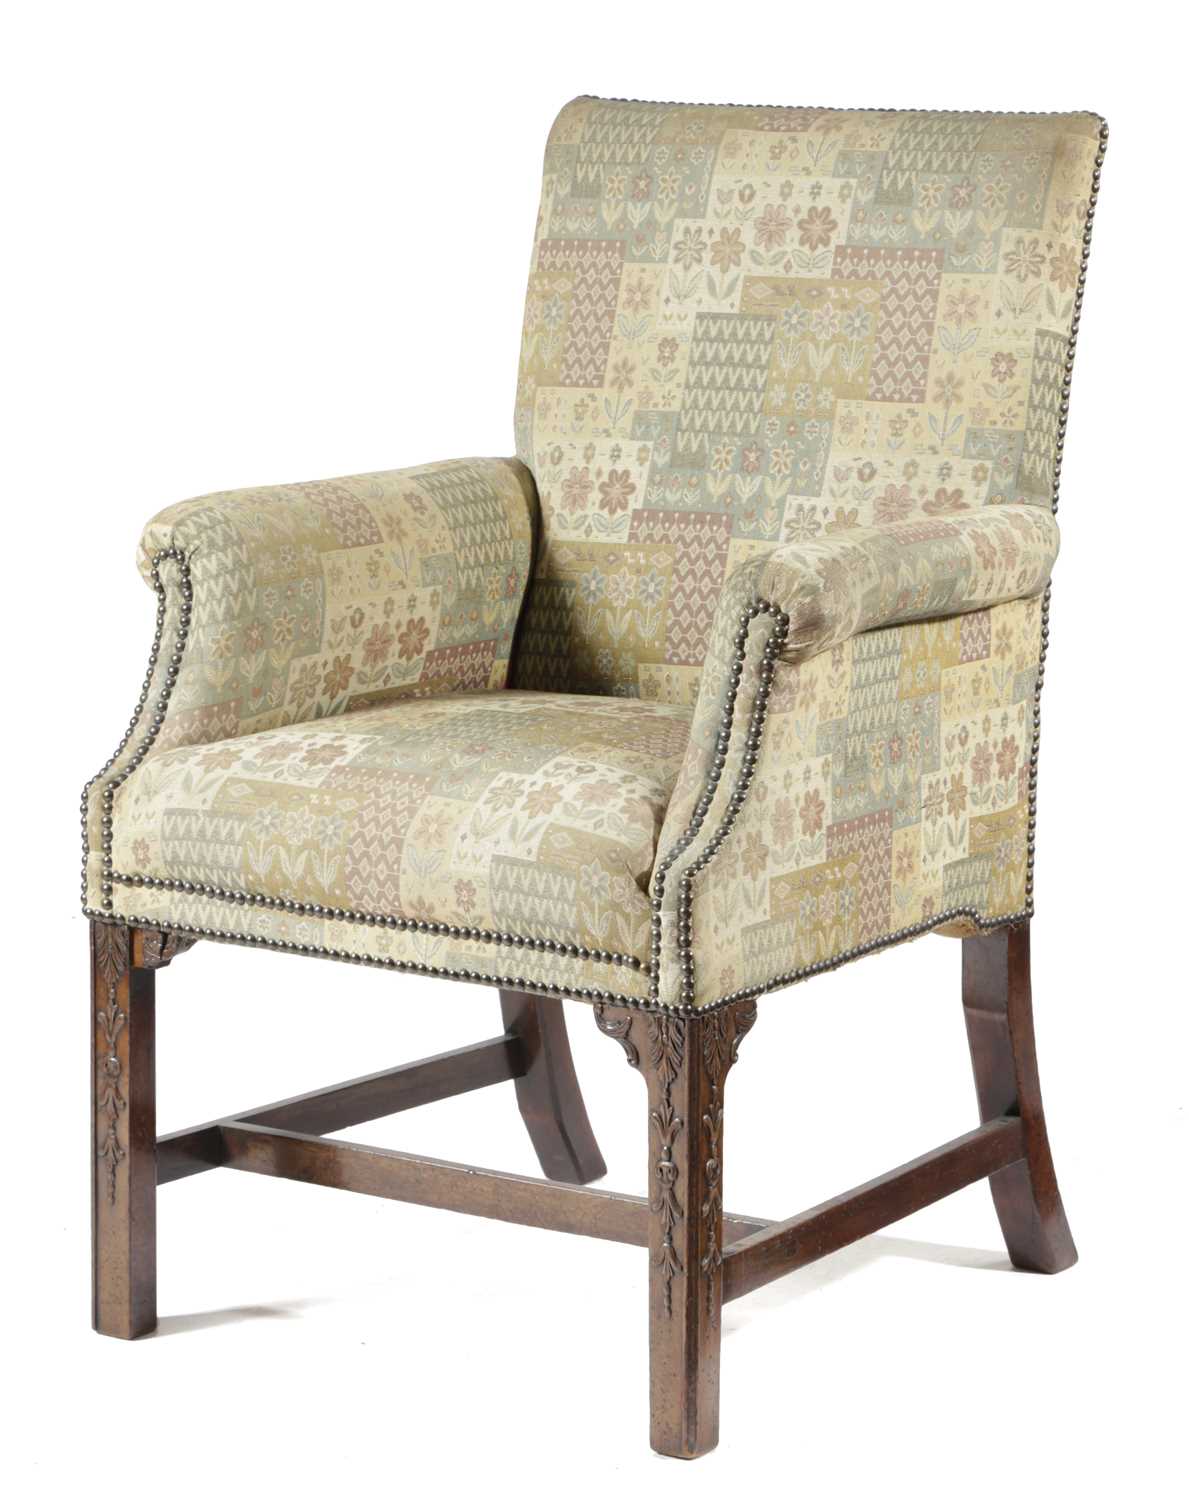 A GEORGE III MAHOGANY ARMCHAIR LATE 18TH CENTURY with later upholstery, the front legs carved with